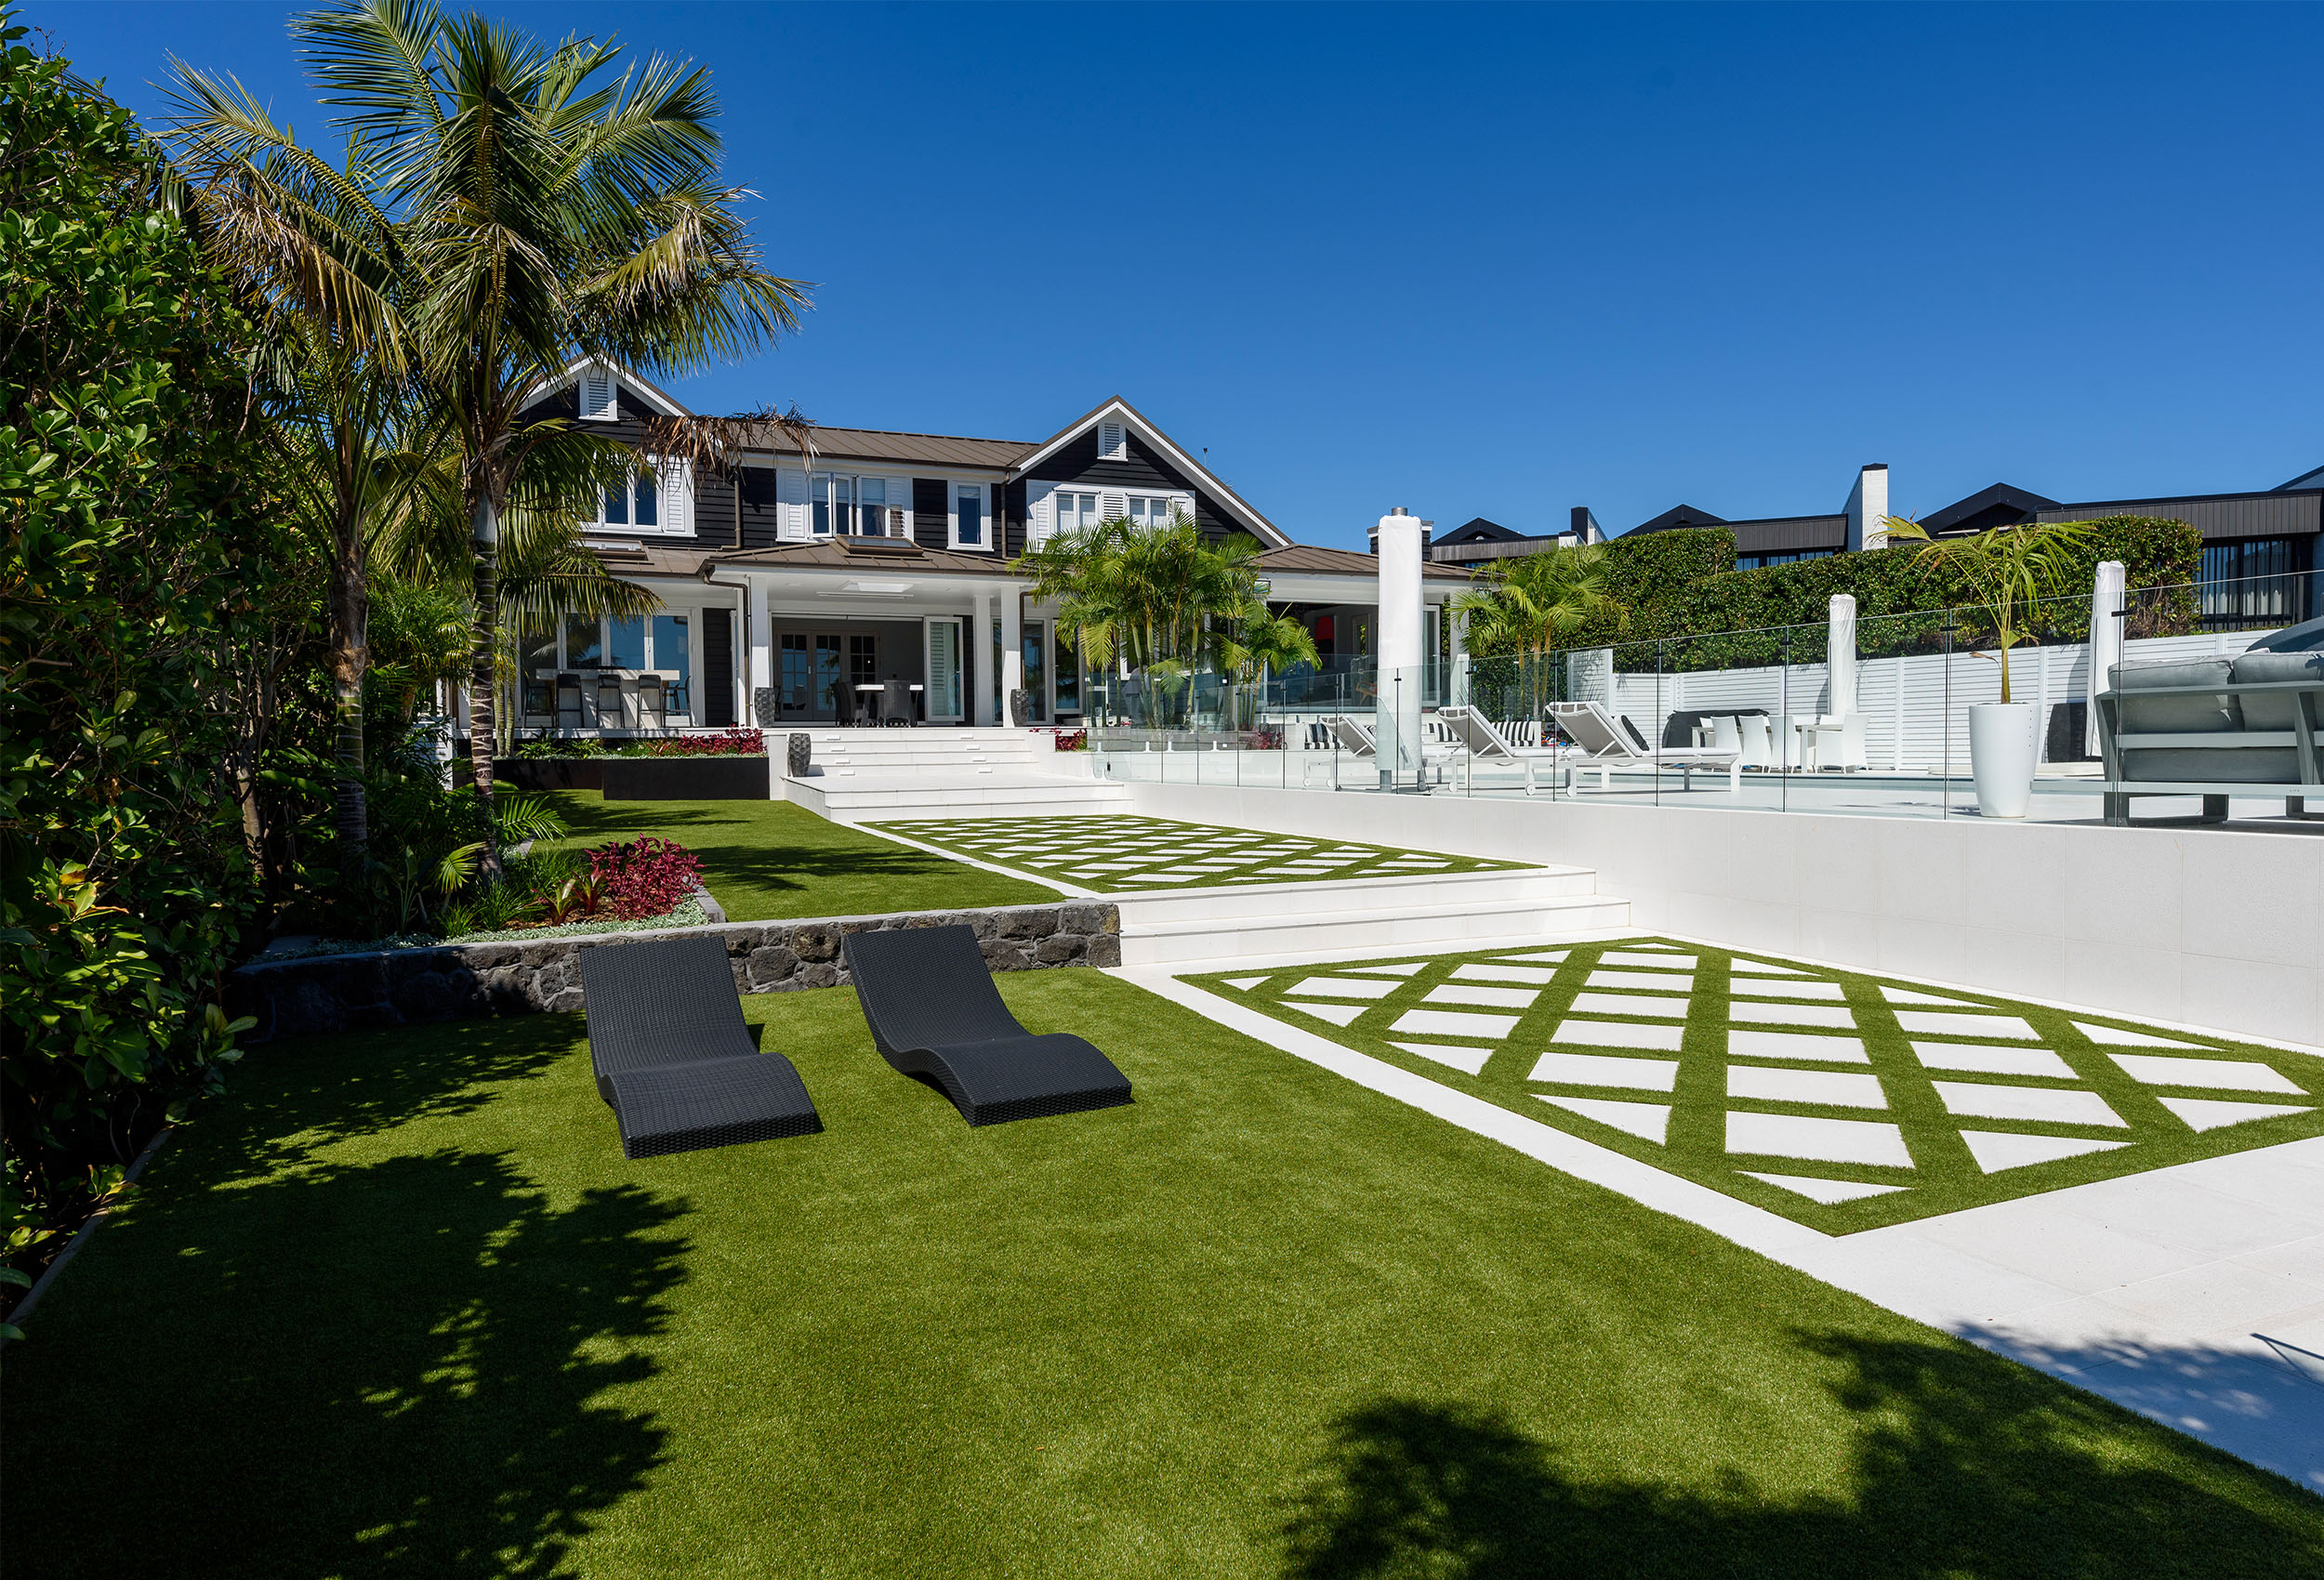 Auckland private Auckland residence by Team Turf featuring Synlawn Esplanade 40